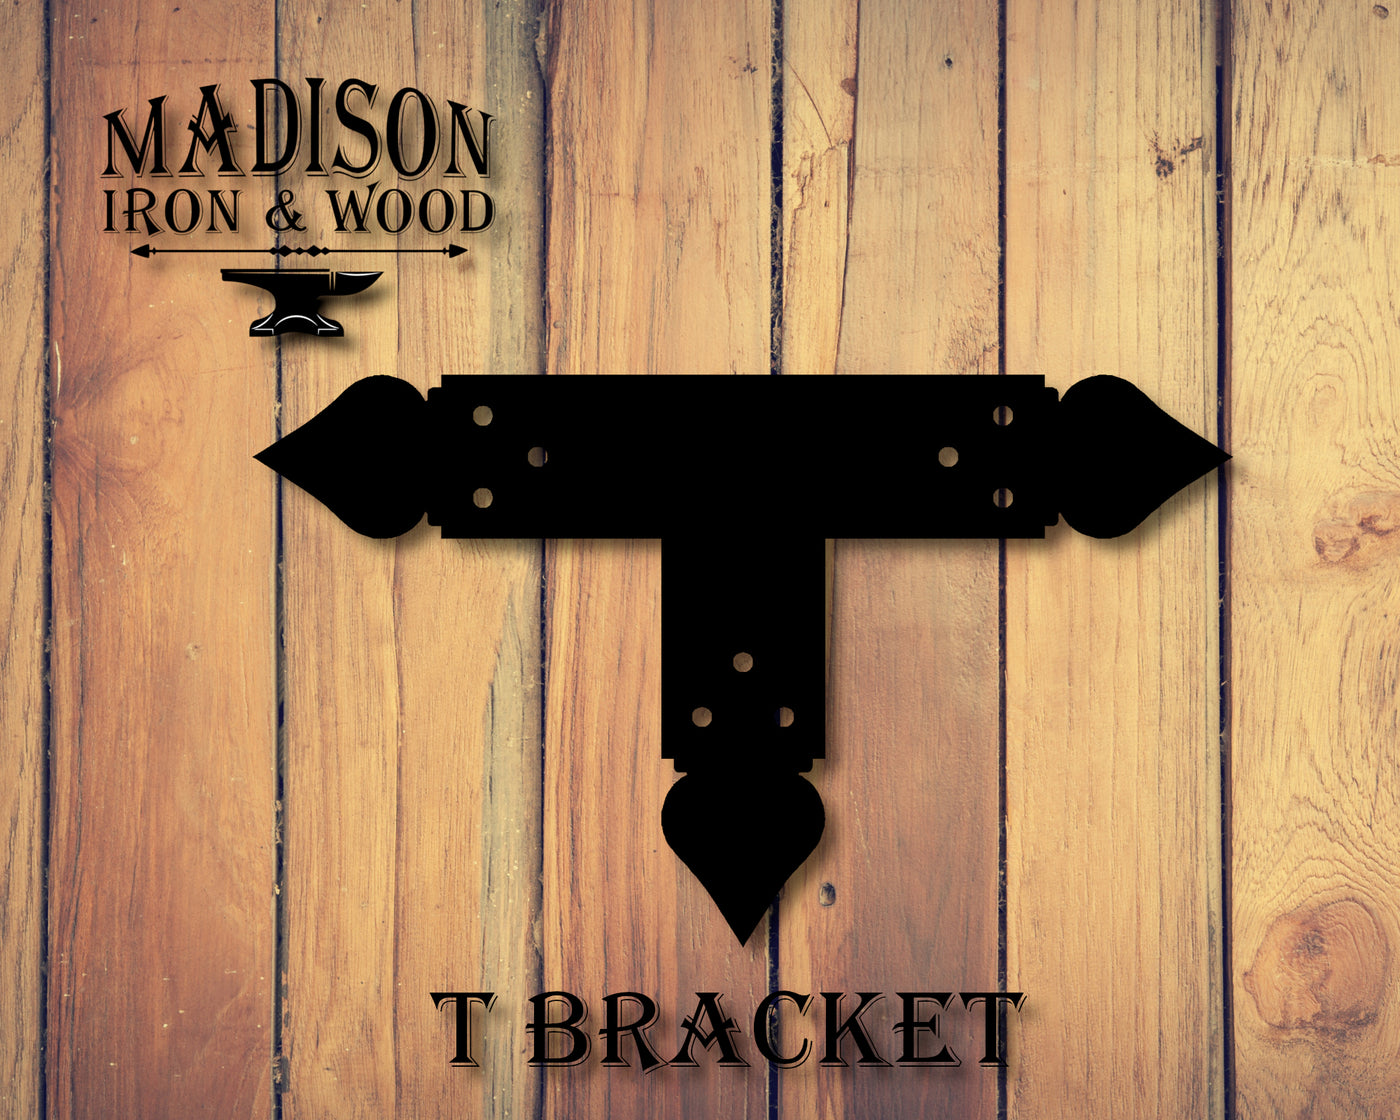 Spade Brackets For 4x4 Dimensional Lumber - Madison Iron and Wood - Brackets - metal outdoor decor - Steel deocrations - american made products - veteran owned business products - fencing decorations - fencing supplies - custom wall decorations - personalized wall signs - steel - decorative post caps - steel post caps - metal post caps - brackets - structural brackets - home improvement - easter - easter decorations - easter gift - easter yard decor